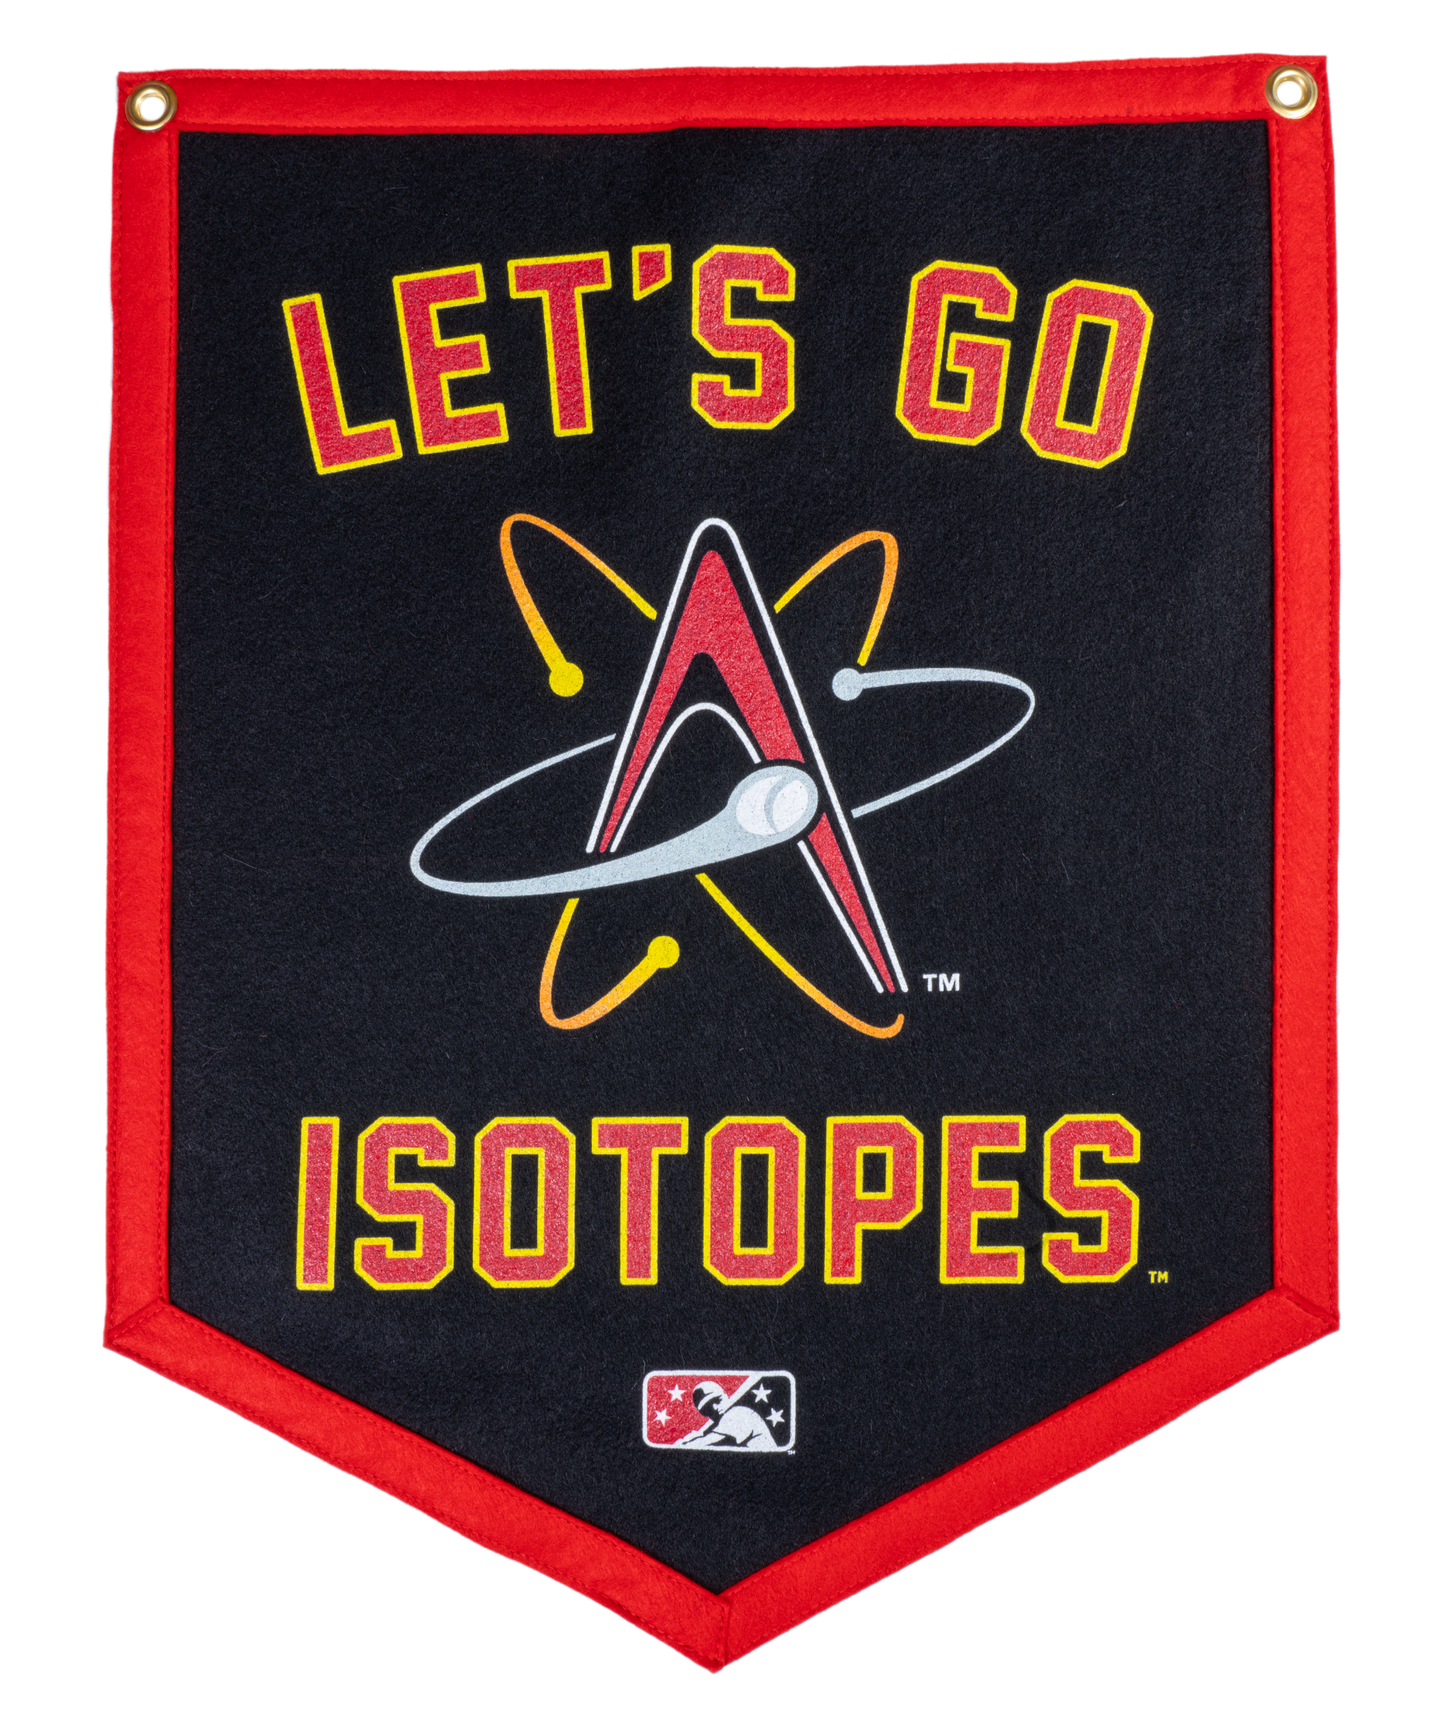 Let's Go Isotopes Camp Flag | MiLB x Oxford Pennant